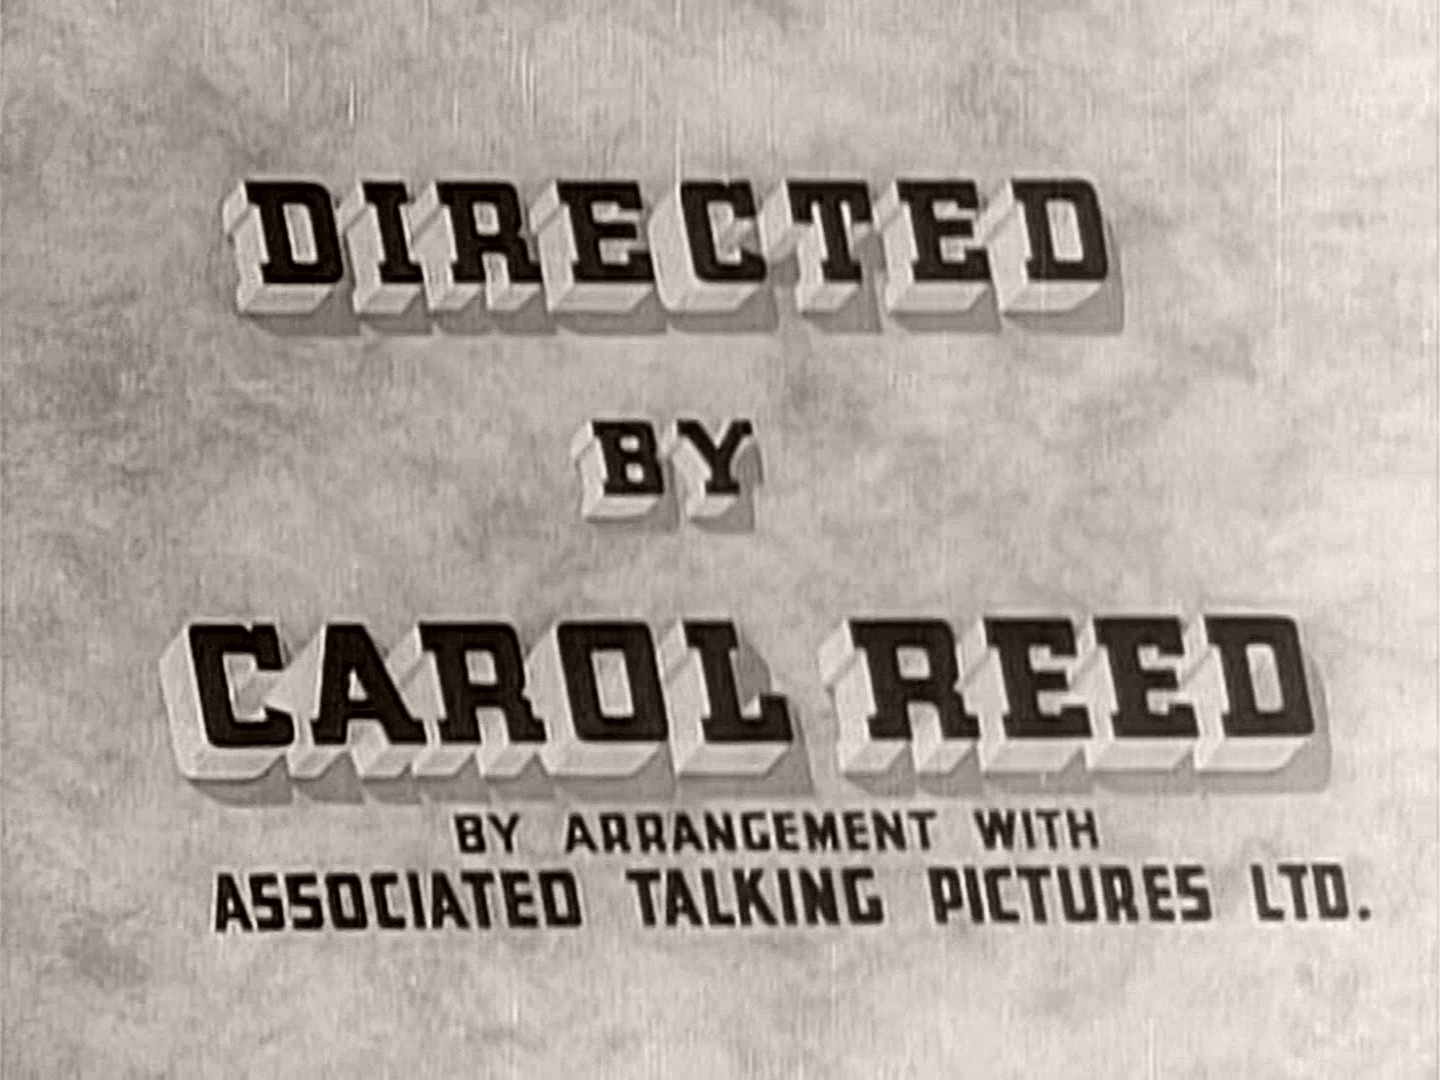 Main title from Climbing High (1938) (4)  Directed by Carole Reed by arrangement with Associated Talking Pictures Ltd